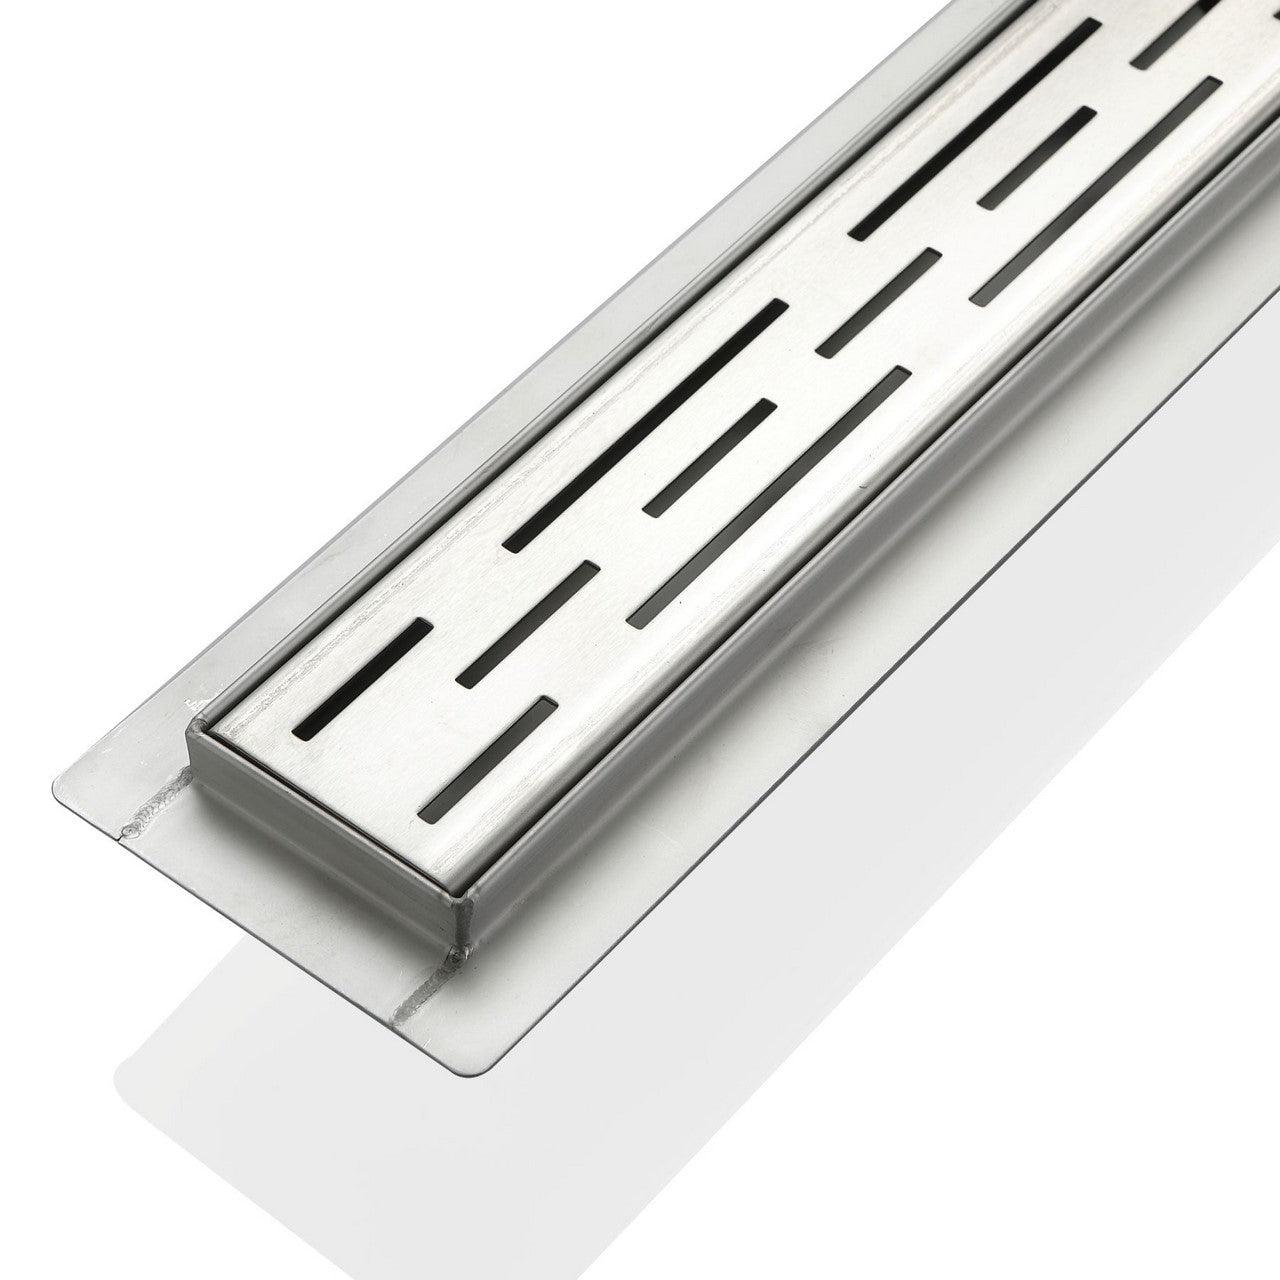 Kube 35.5" Linear Drain with Linear Grate - Hbdepot